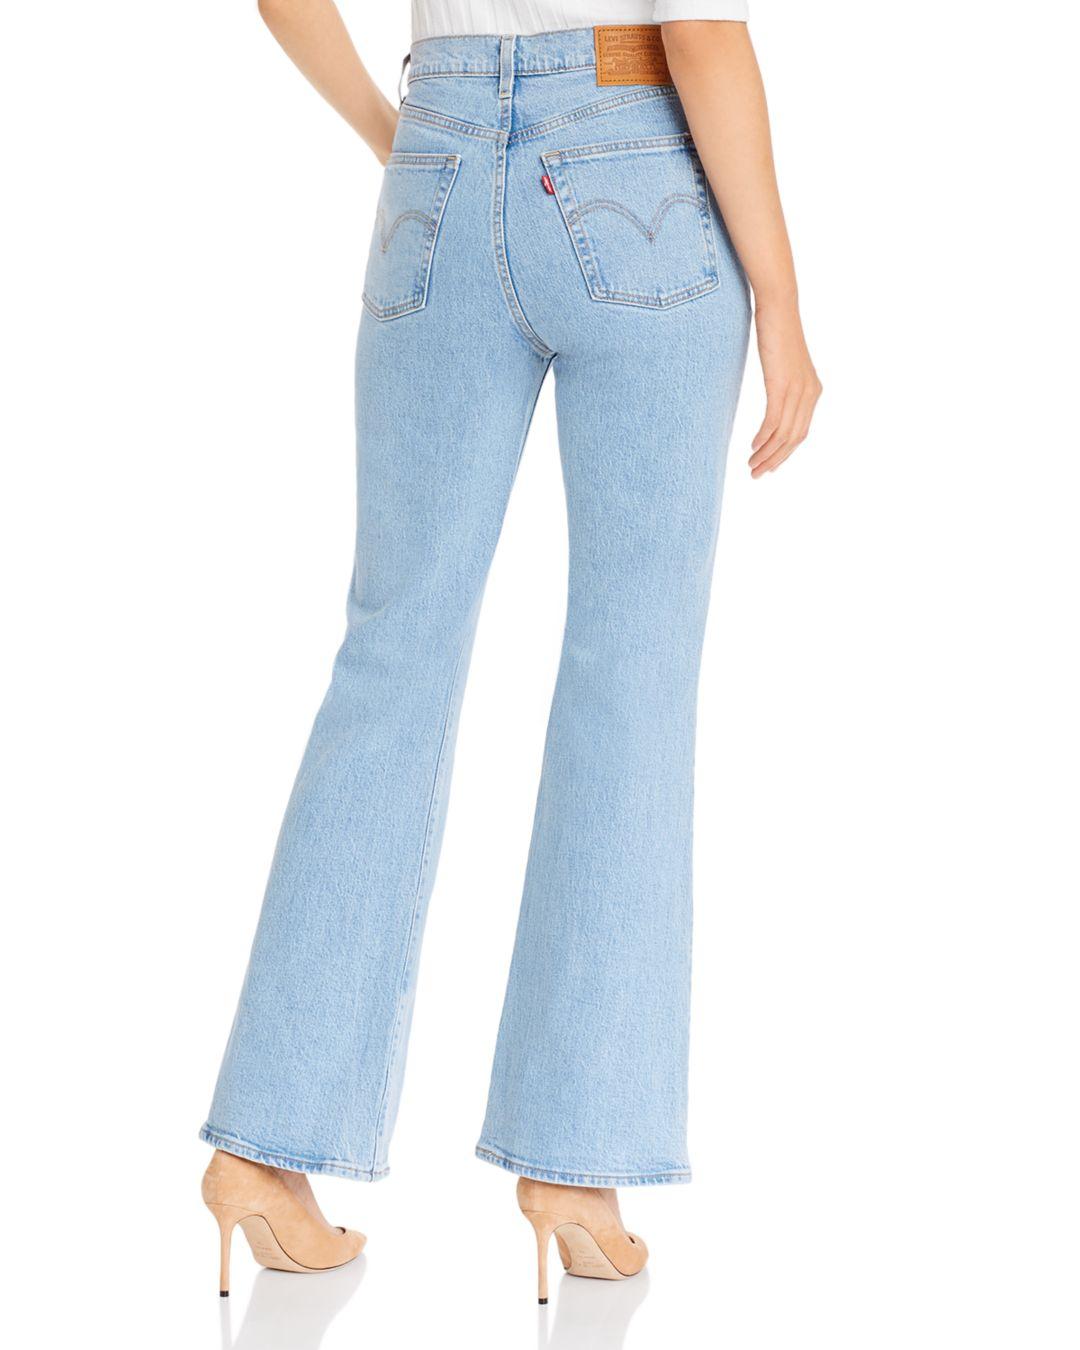 Levi's Flare Pants Hotsell, SAVE 56%.